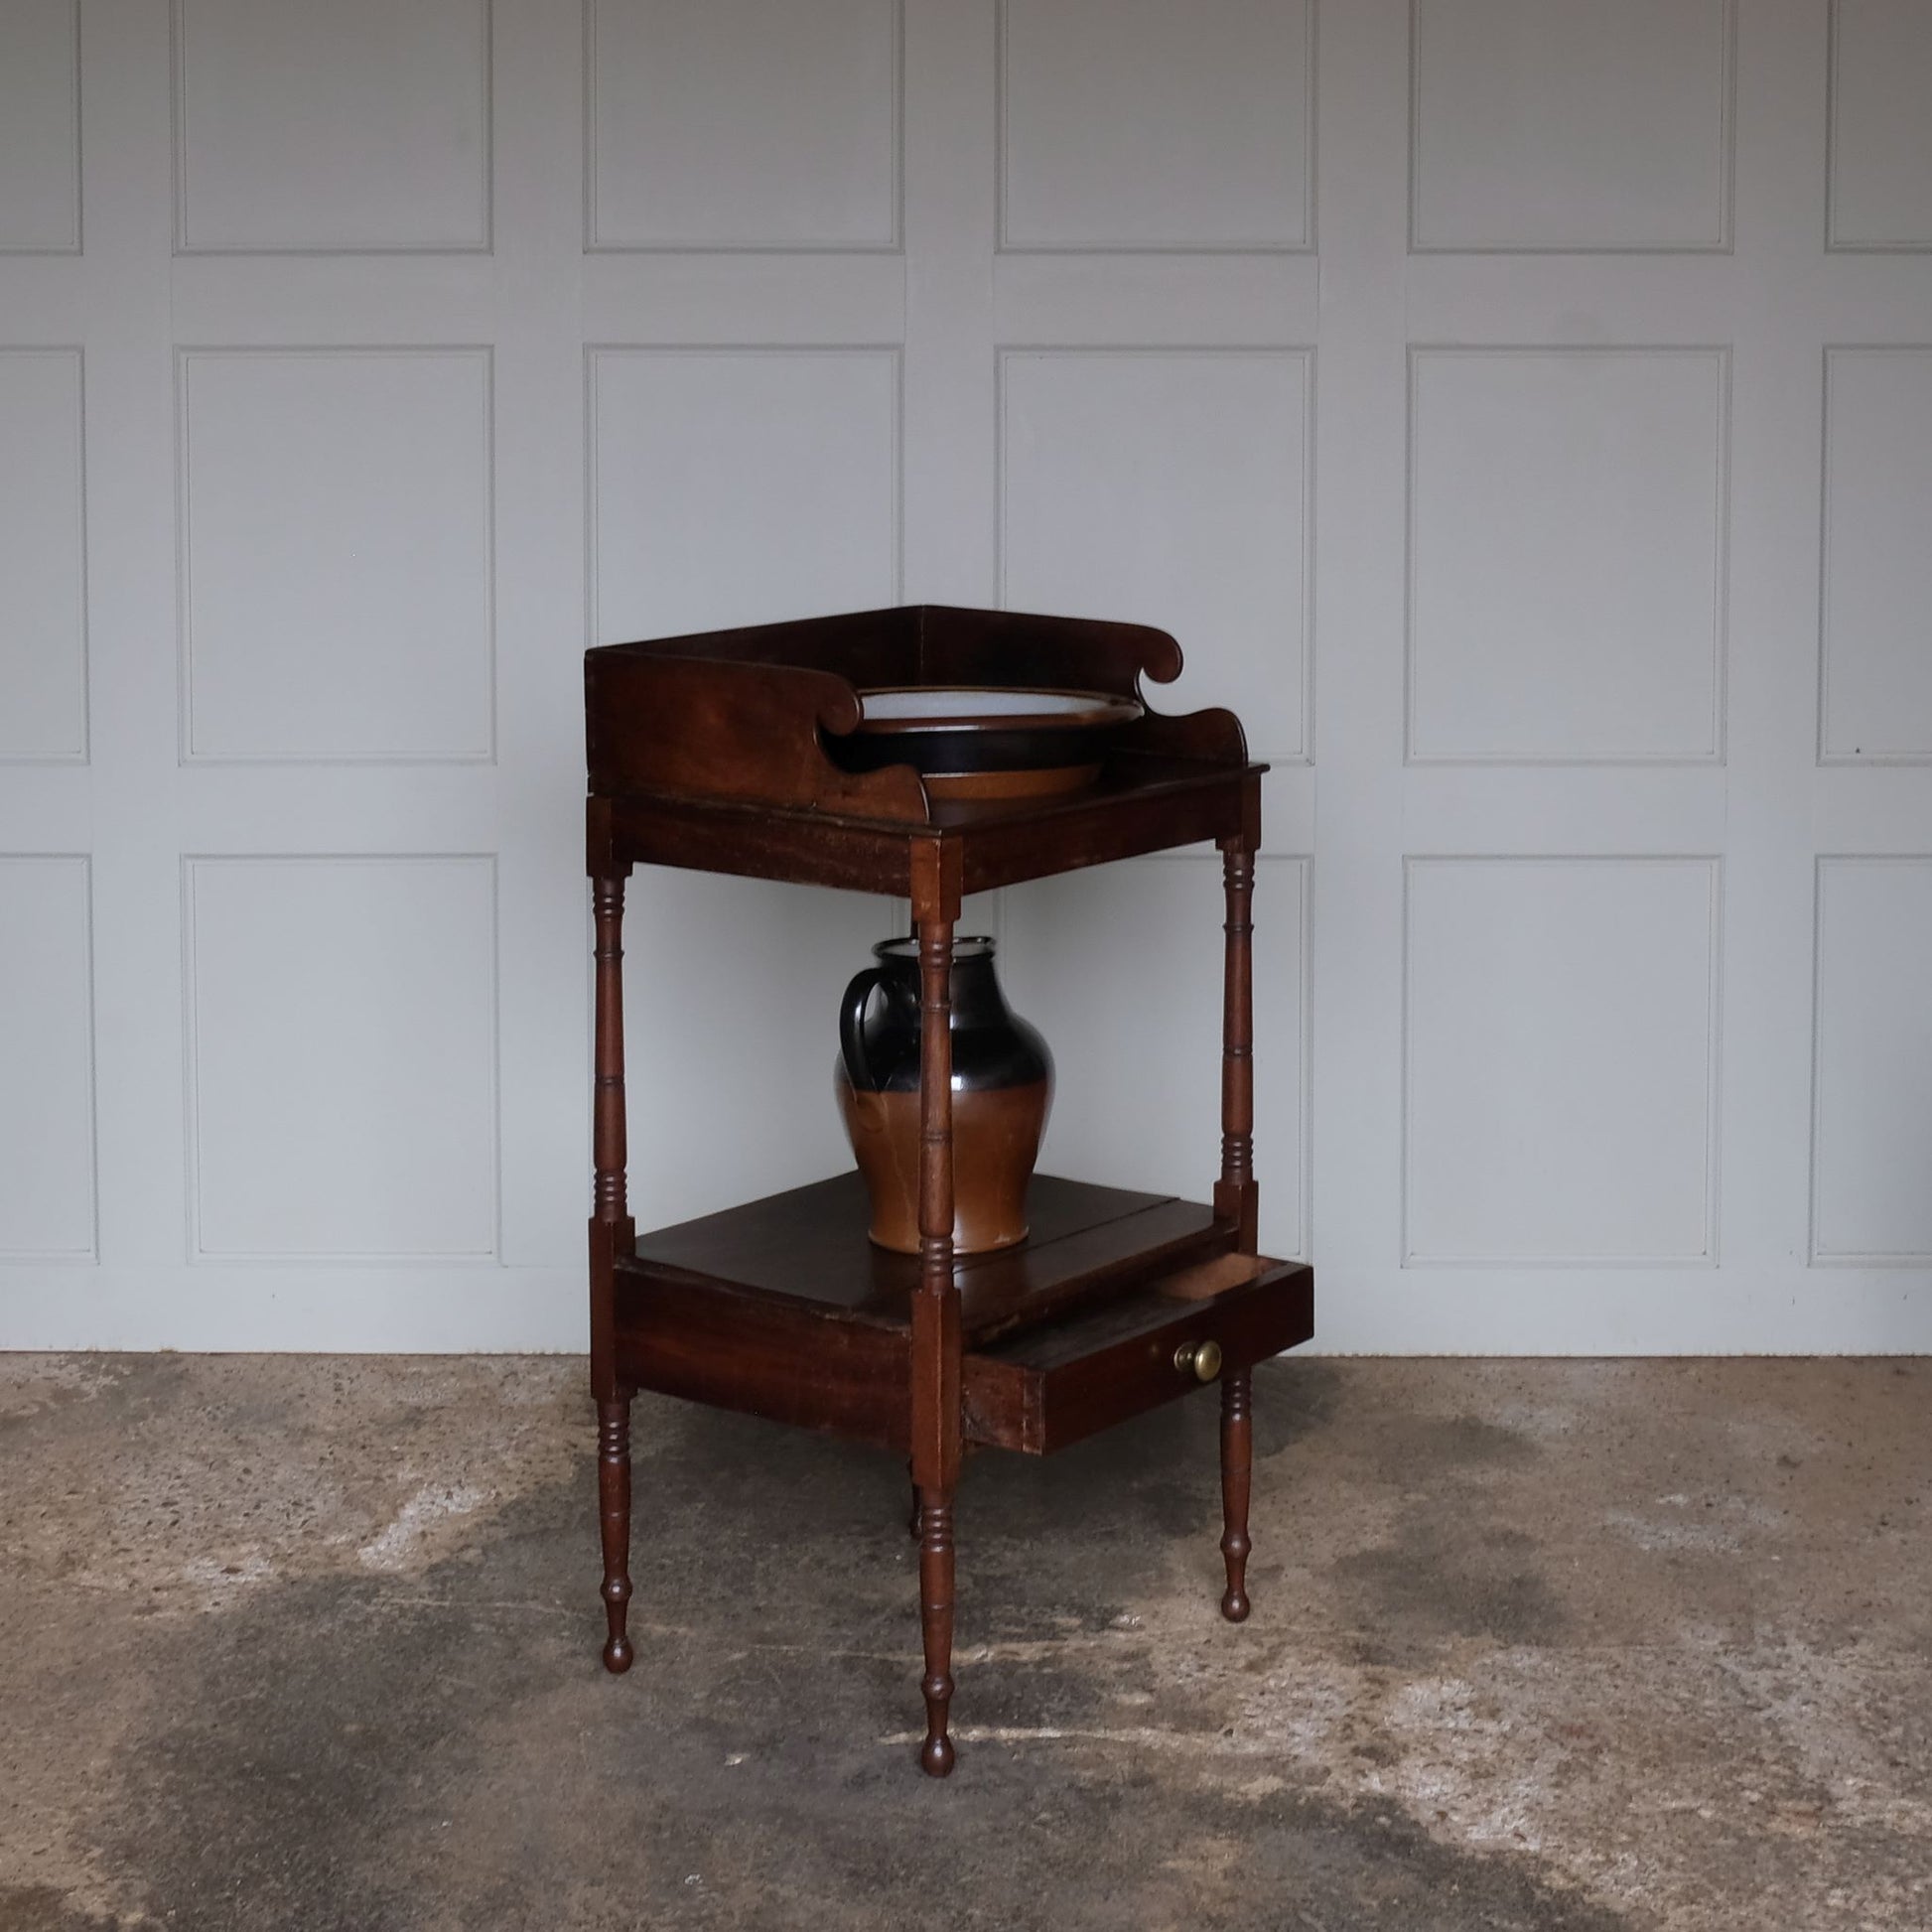 A charming early Victorian mahogany washstand, the three quarter gallery with a basin recess on turned and ringed uprights, over a single shelf with drawer over turned and ringed legs, also comprising a later stoneware basin and jug, with a gentle patina and wear commensurate with age and use, otherwise in good condition.